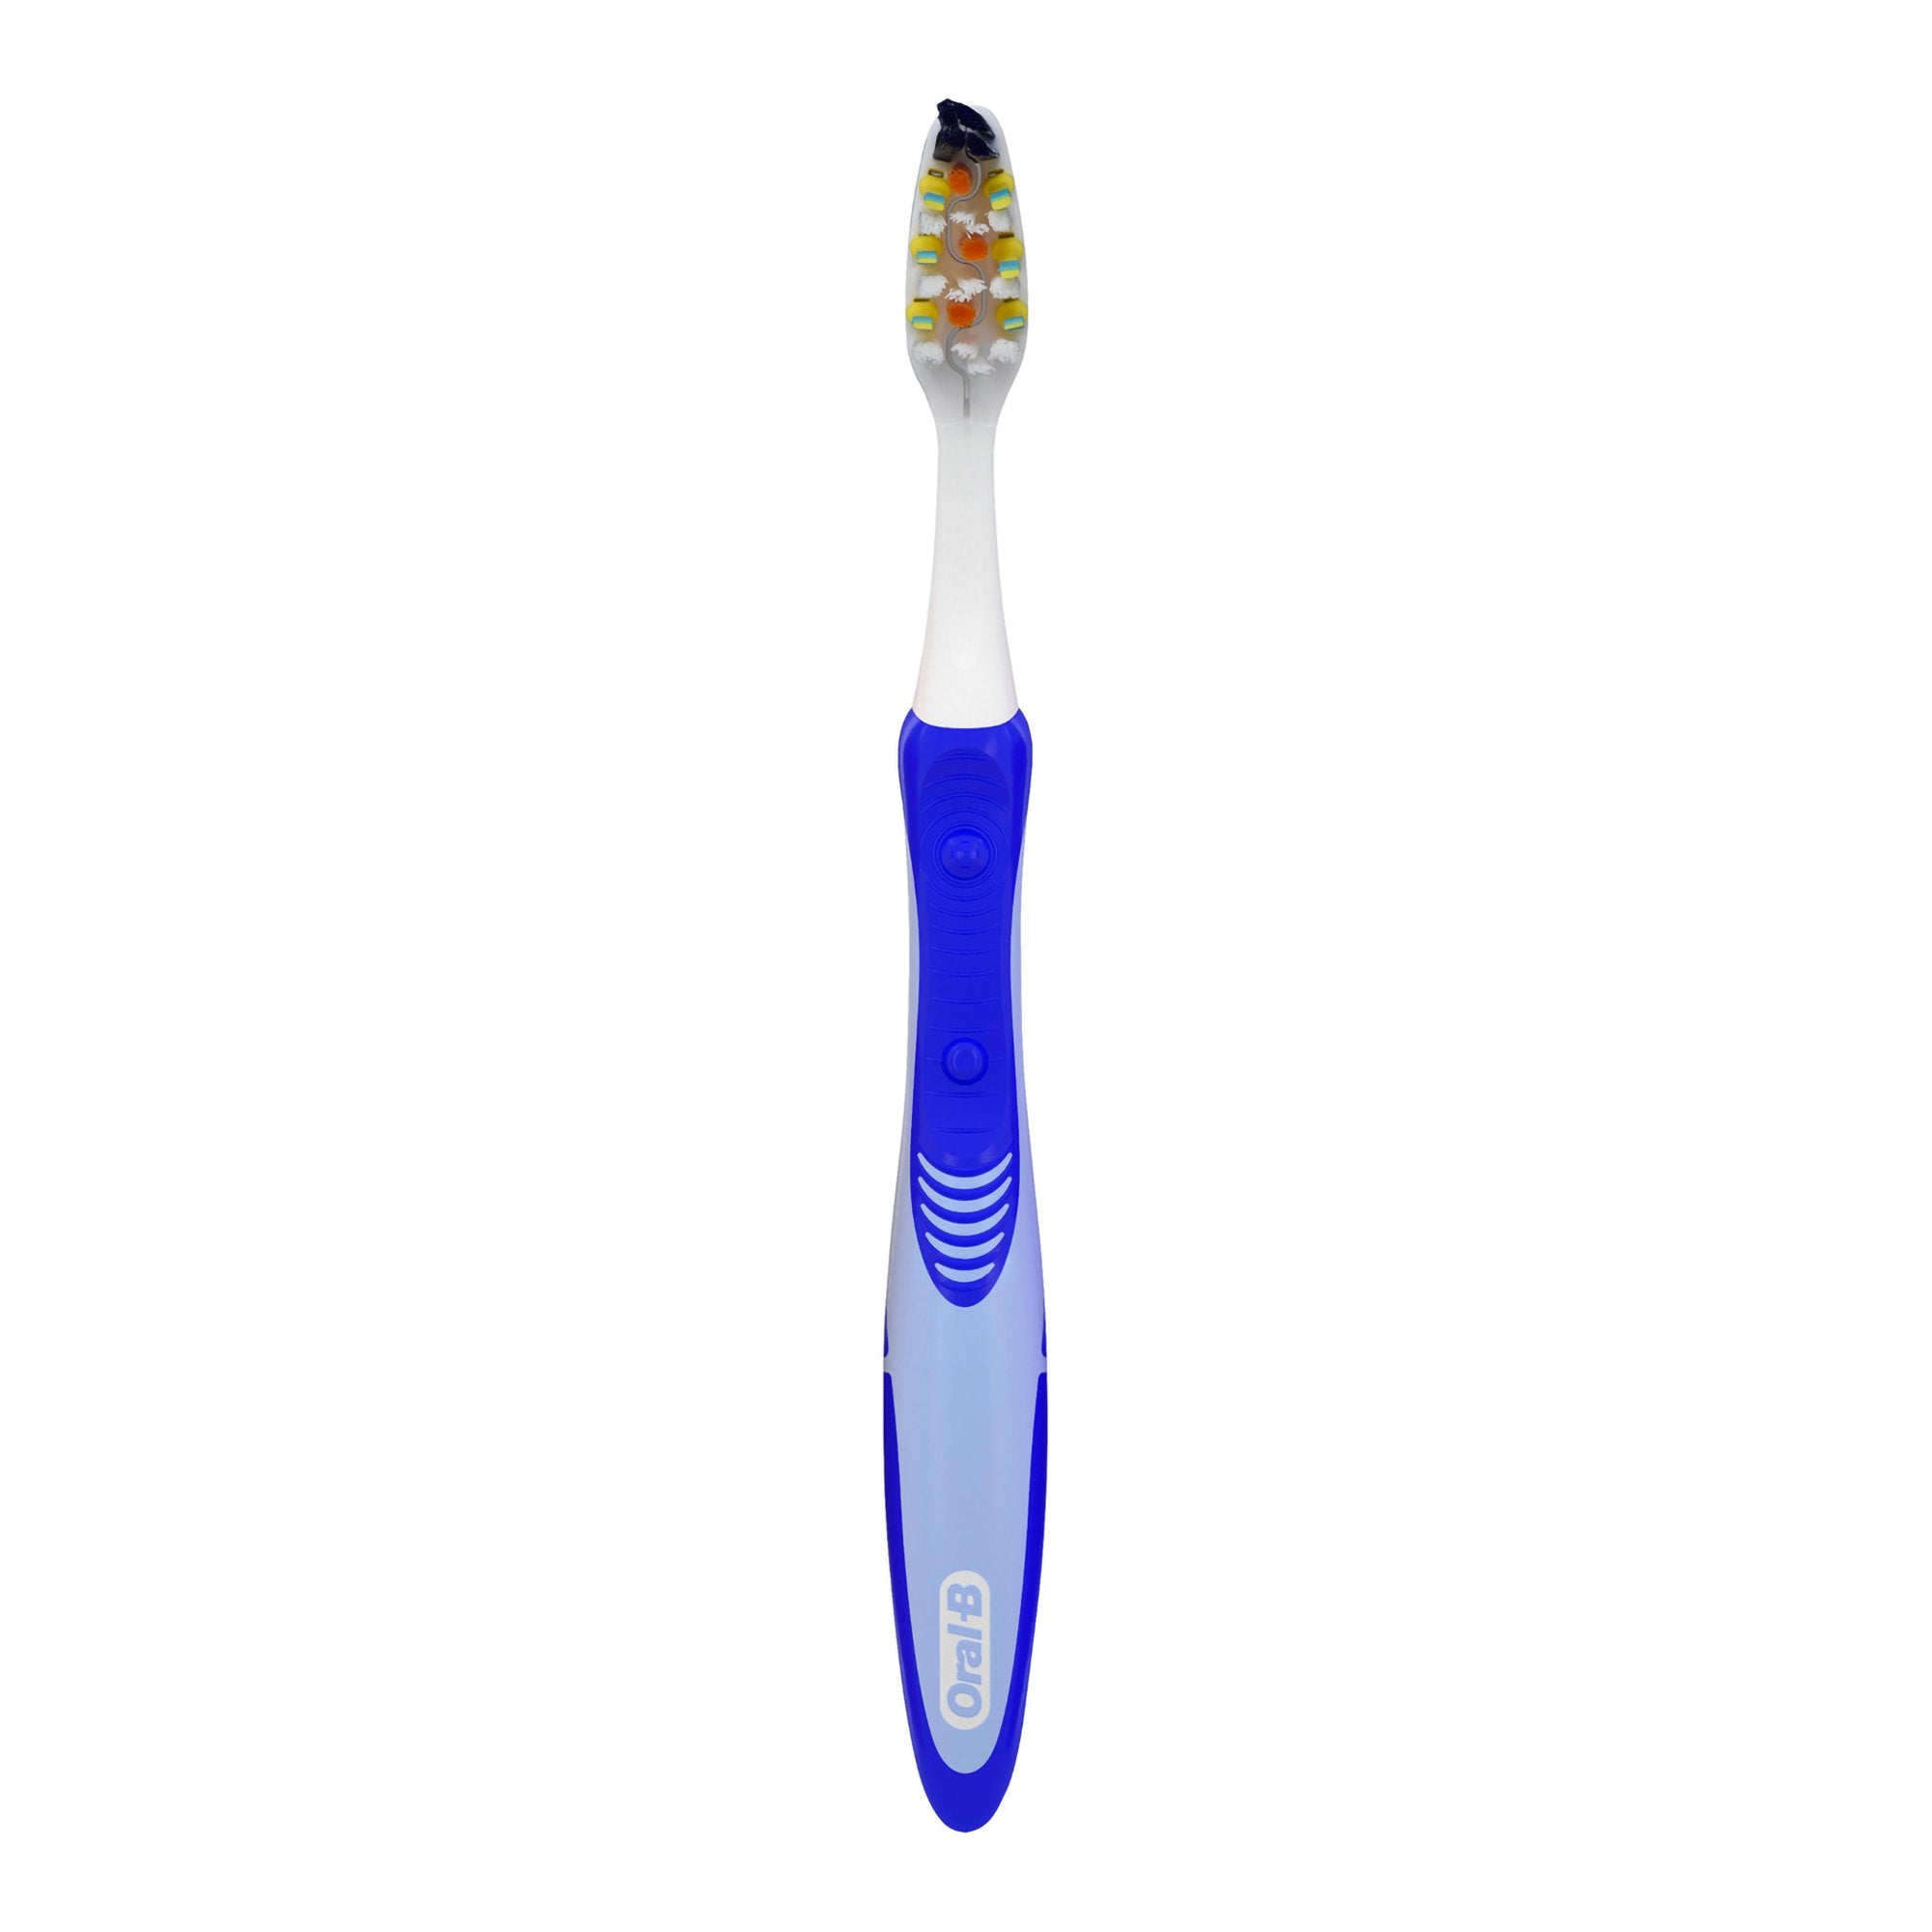 Toothbrush Oral-B Pulsar Blue / White Adult Soft (1 Unit)